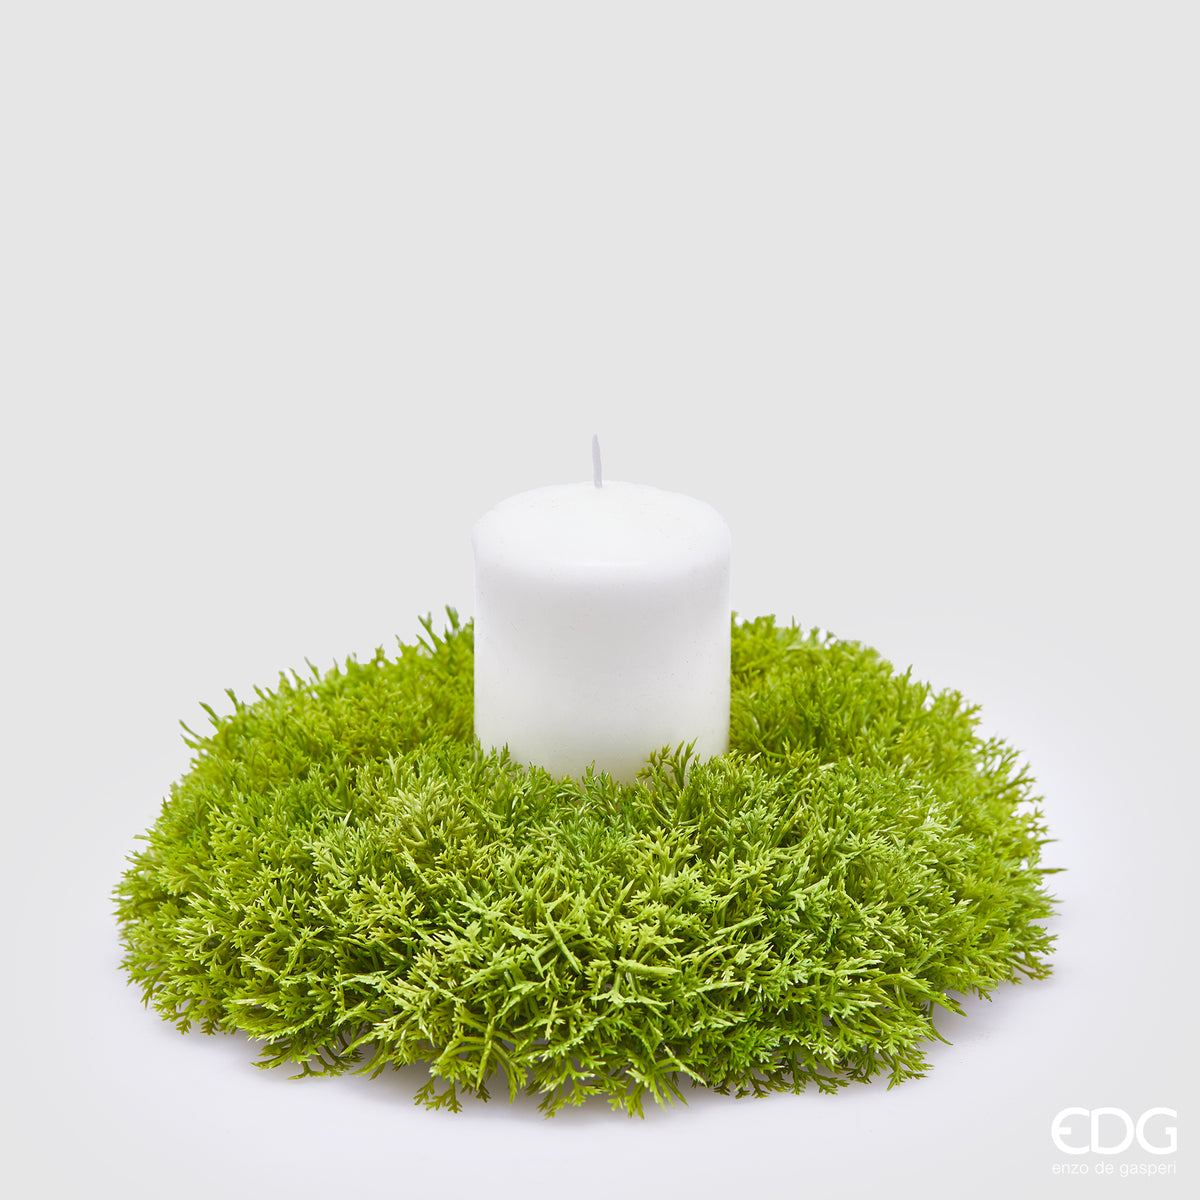 Edg - moss candle holder wreath | rohome